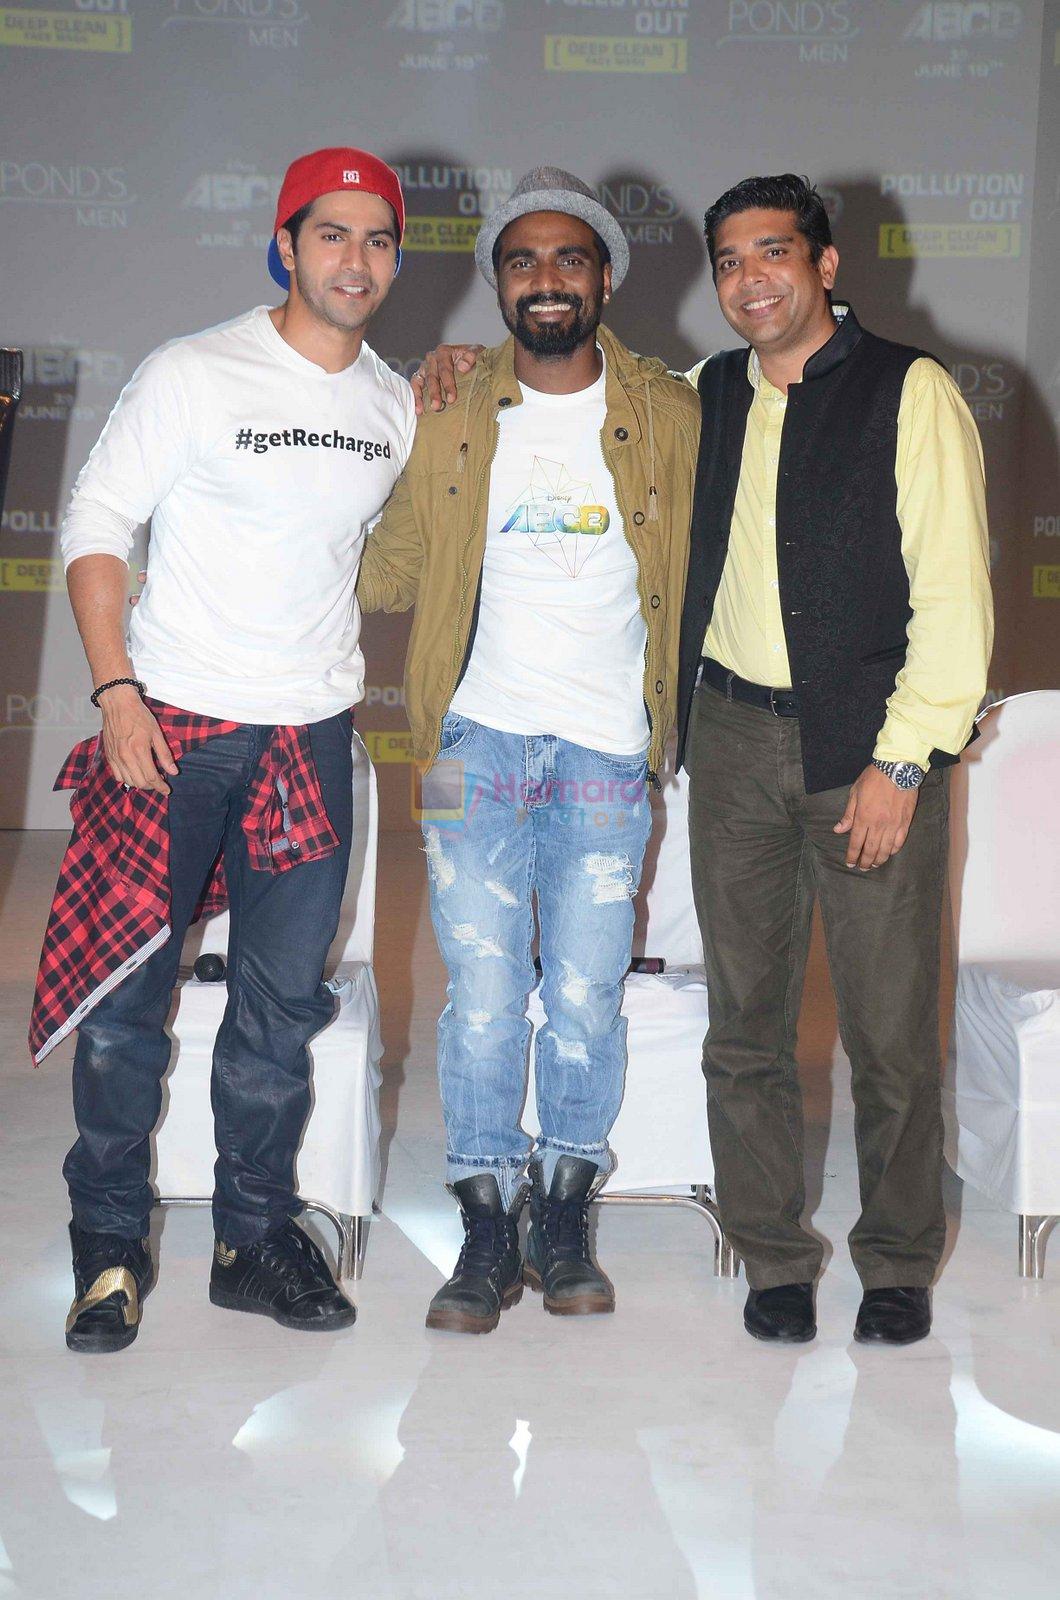 Remo D Souza and varun Dhawan's 4D music and dance performance in association with Pond's men and ABCD 2 in Byculla on 7th June 2015